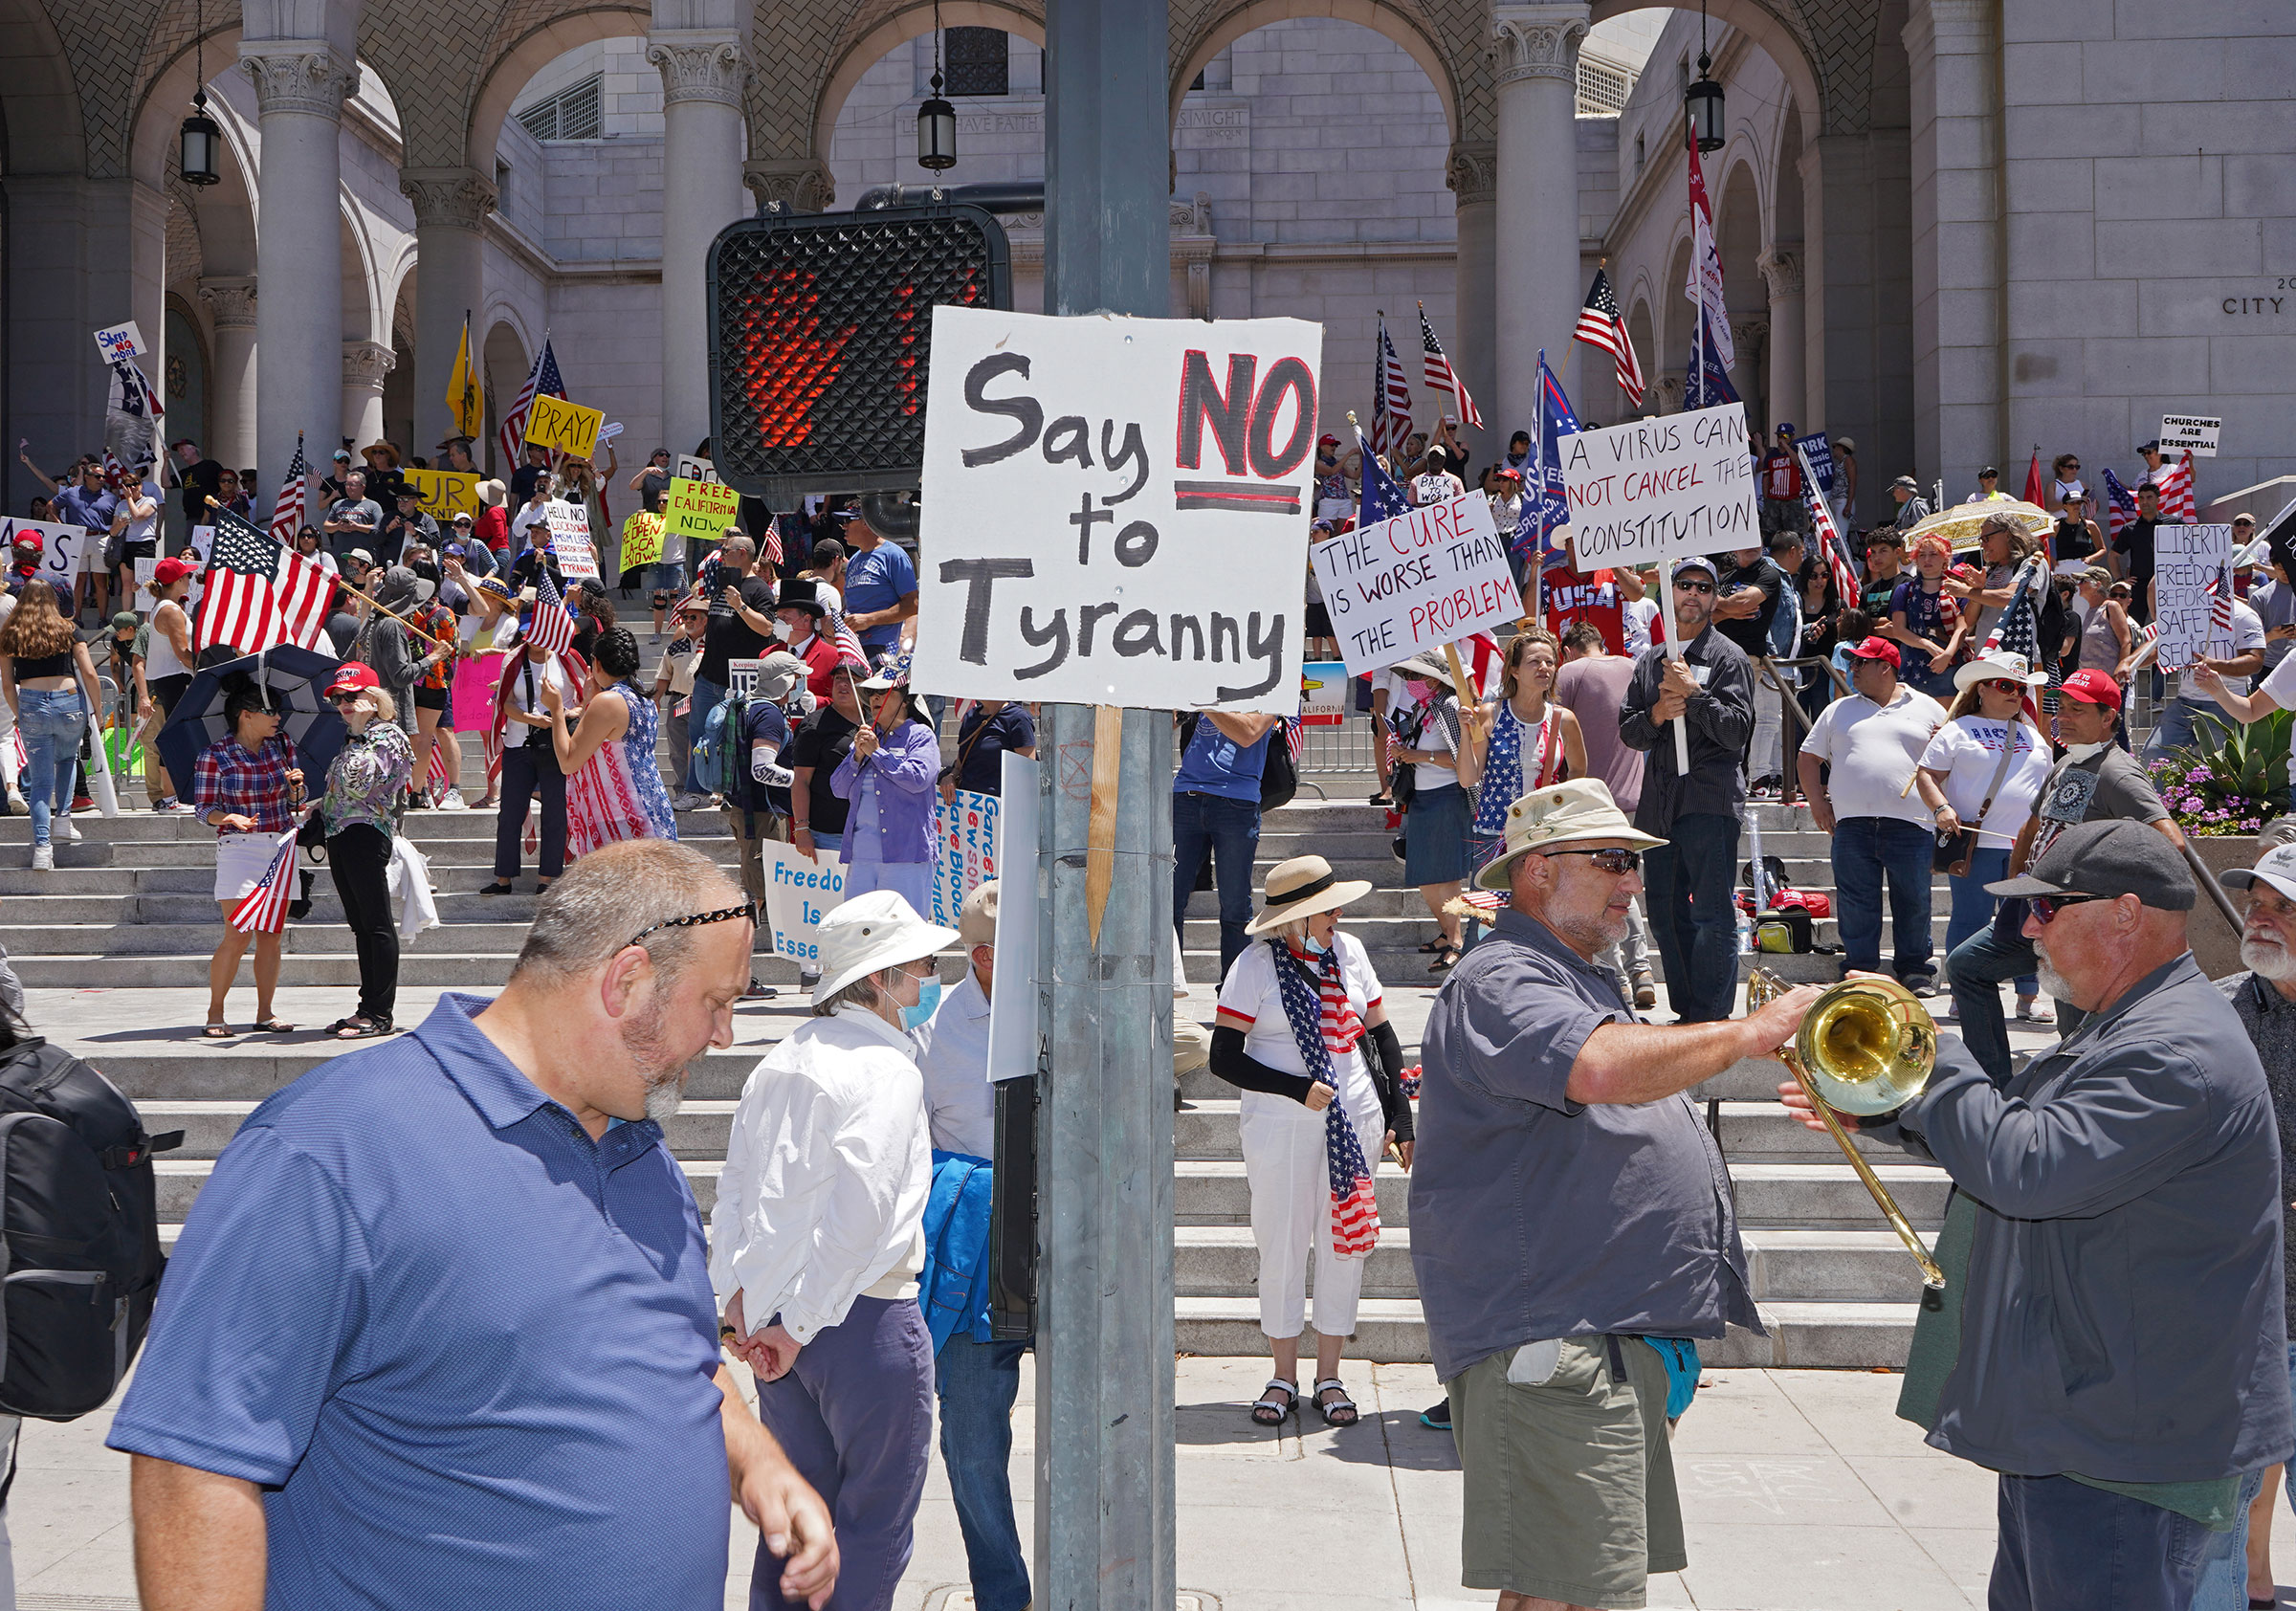 Protesters calling for a reopening of California from coronavirus lockdown measures and restrictions in front of City Hall in Los Angeles, May 24, 2020. (Jamie Lee Curtis Taete)